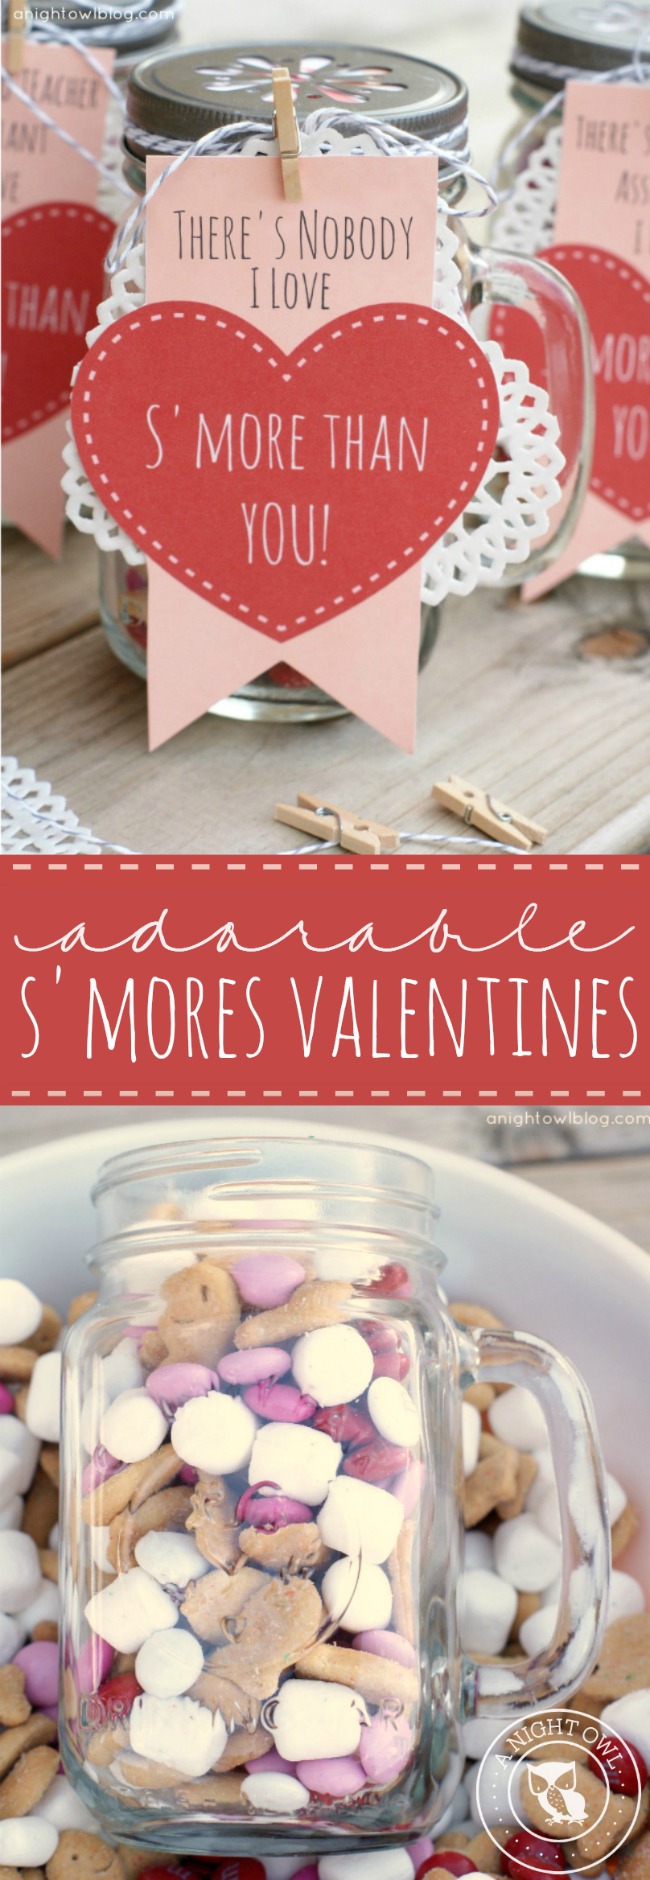 Adorable S'mores Valentines - mason jars filled with s'mores snack mix and FREE printables!